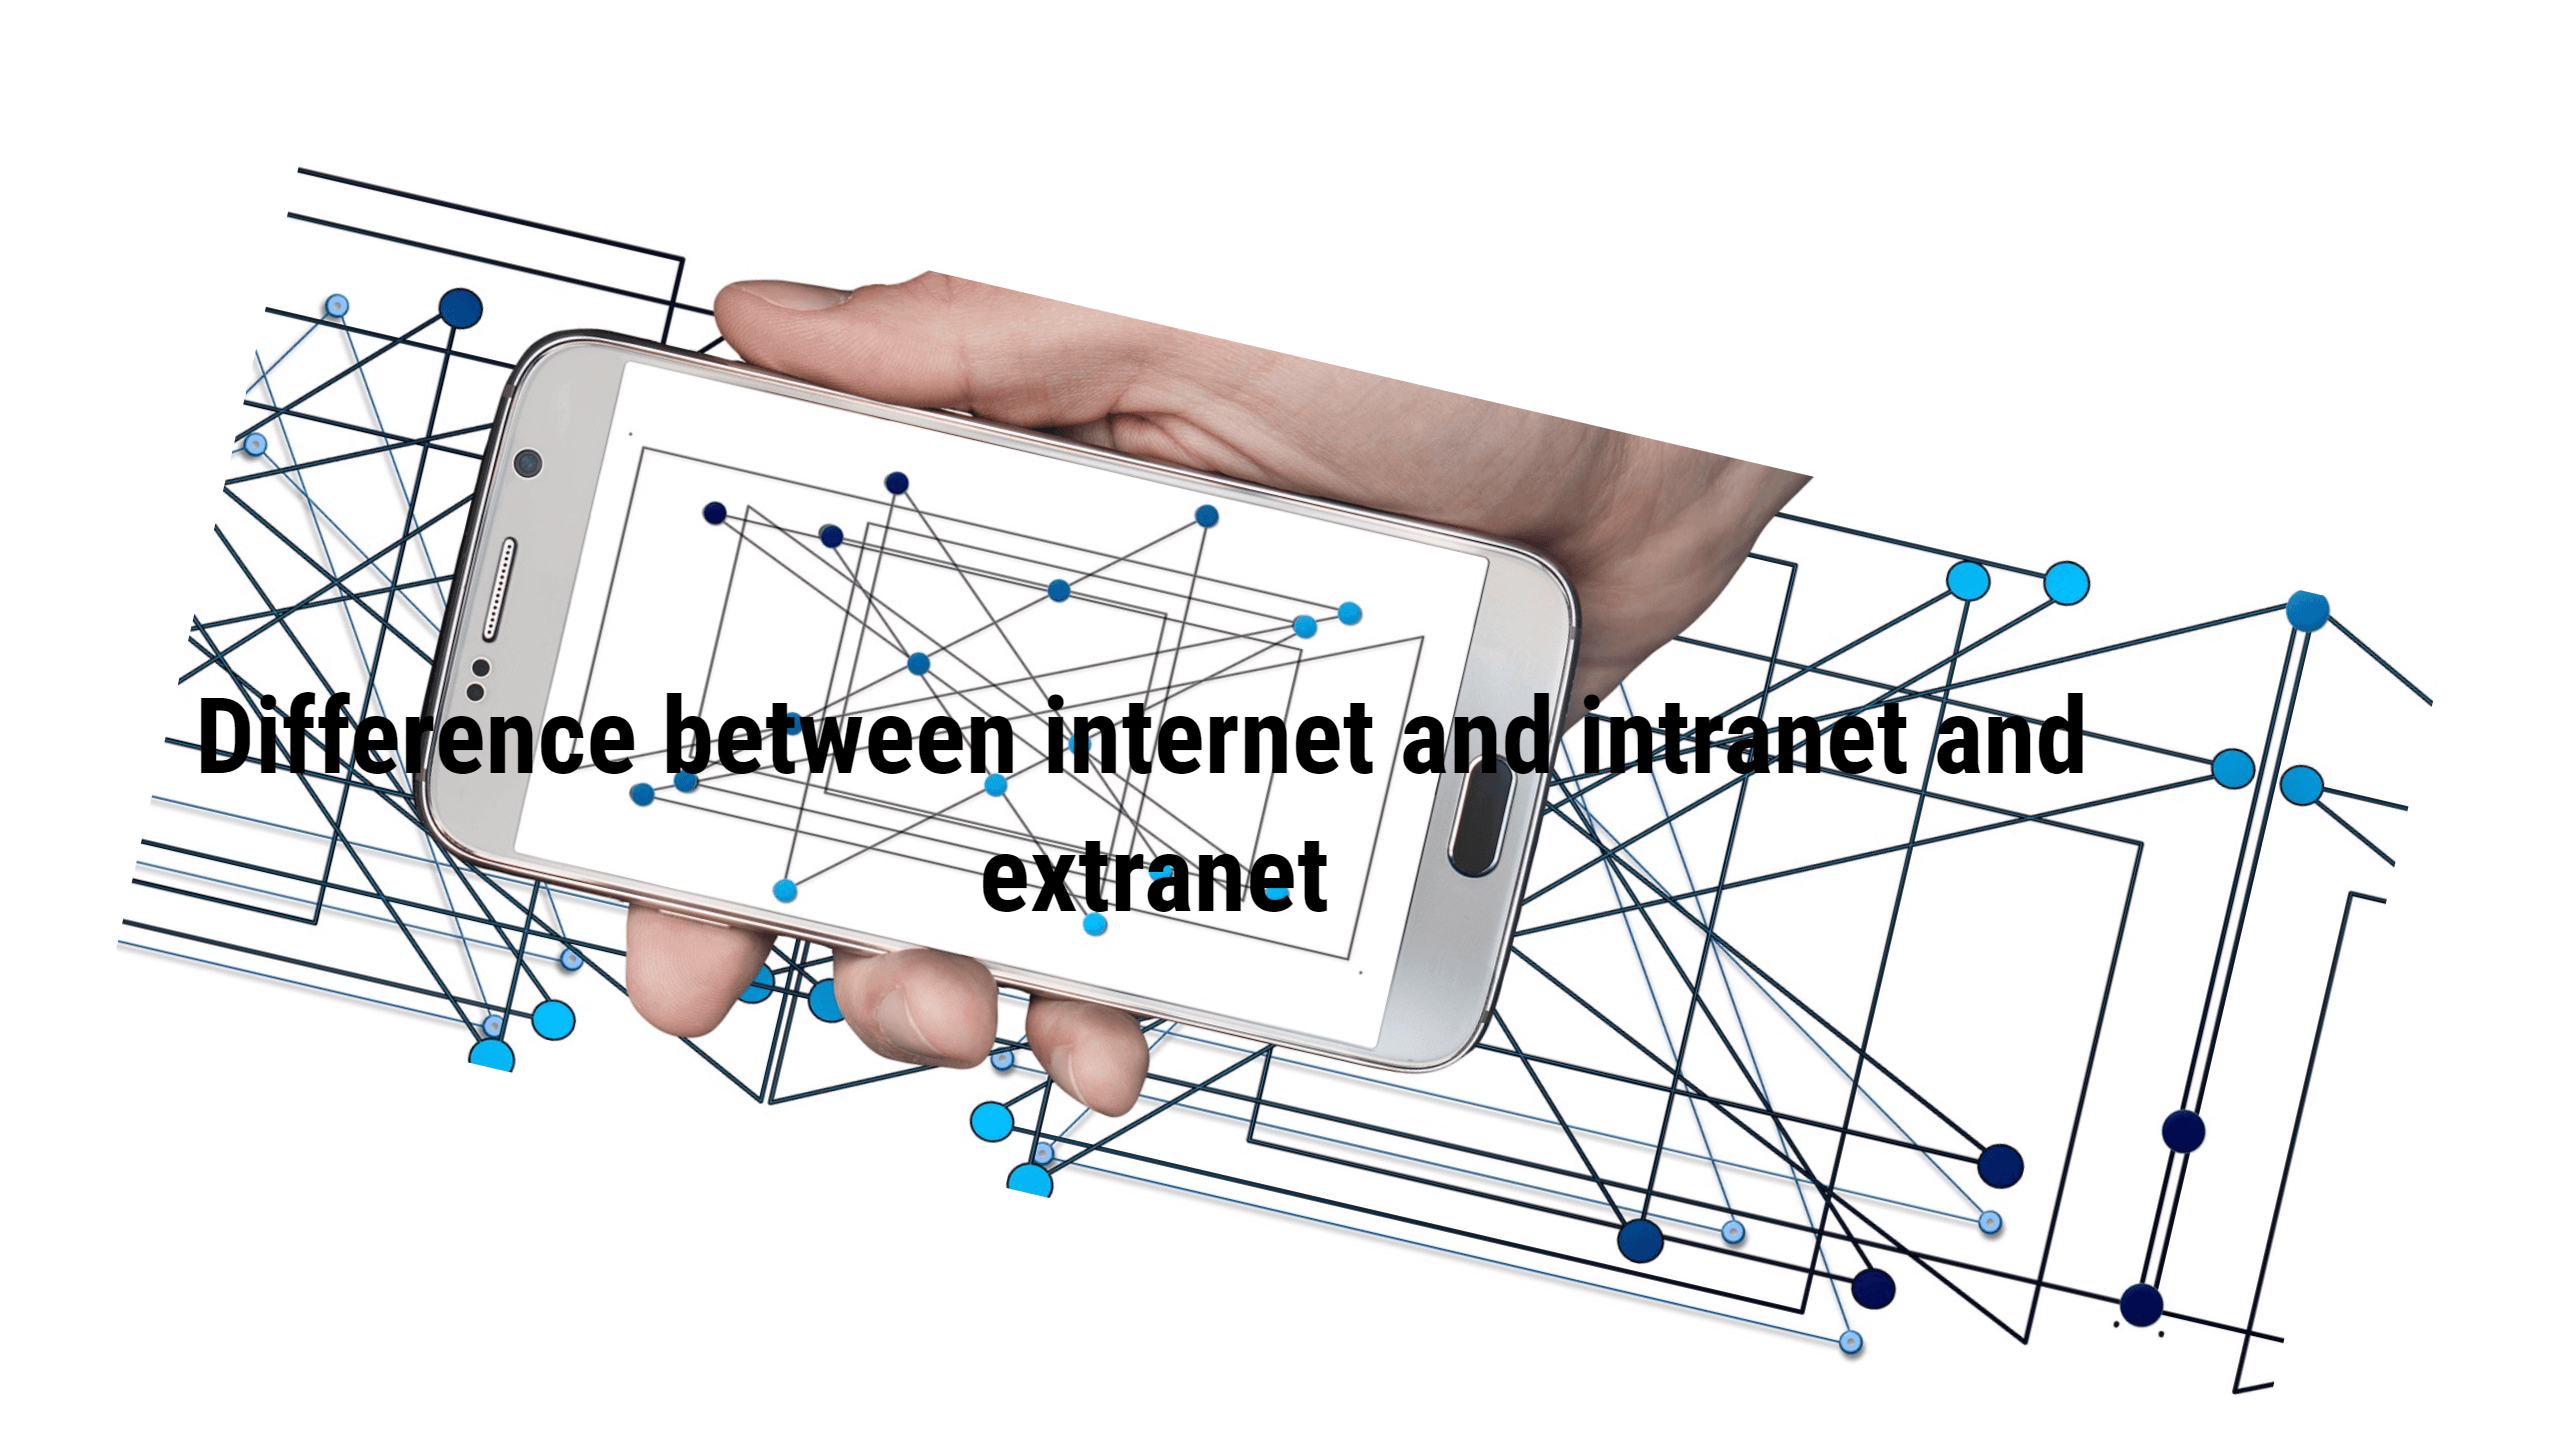 What is Difference between internet and intranet and extranet